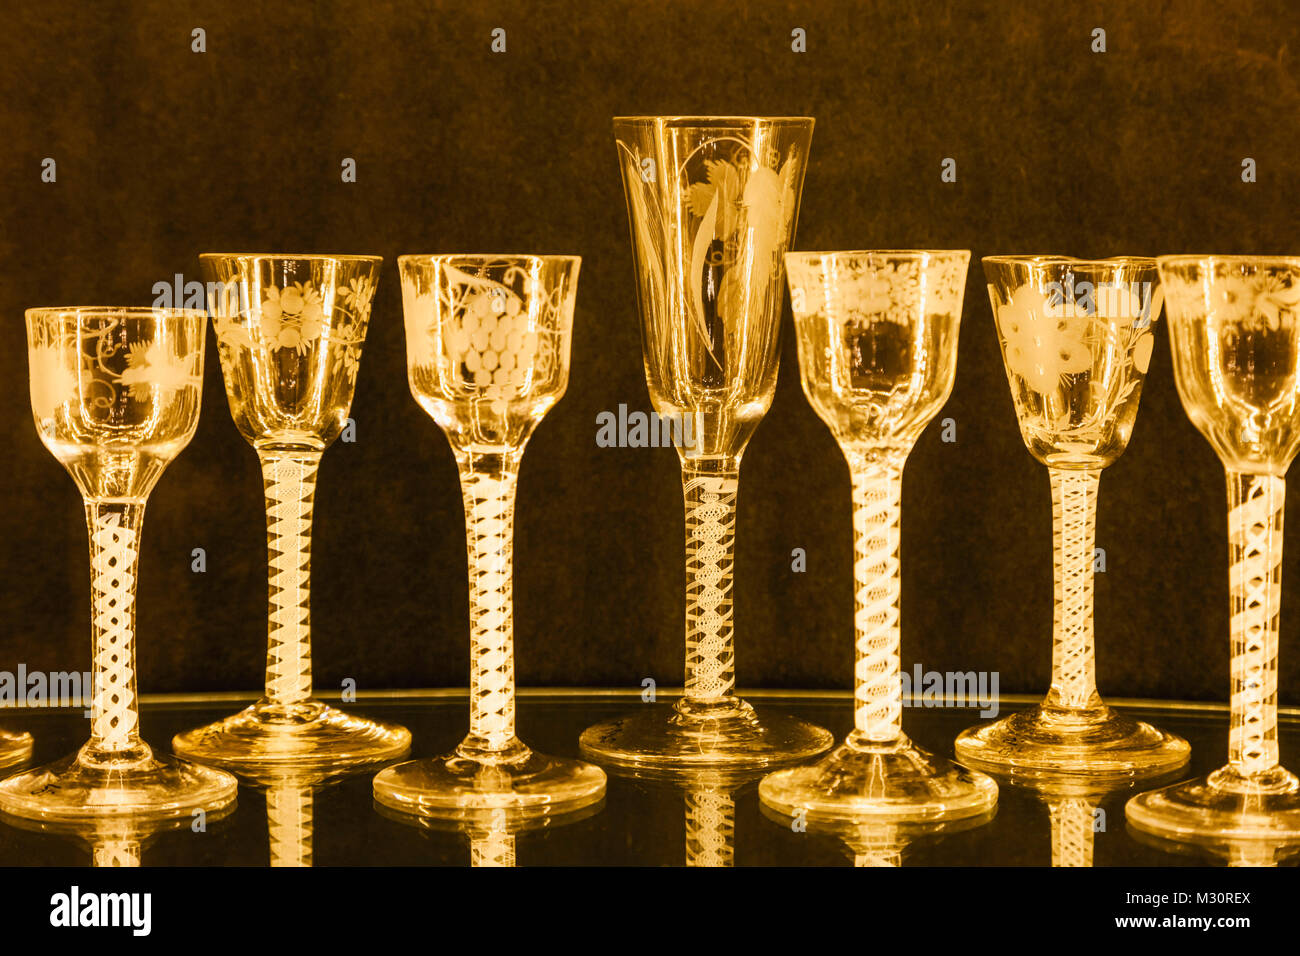 England, London, The City, The Vinters' Company, The Vinters' Hall, Display of Historical Wine Glasses Stock Photo